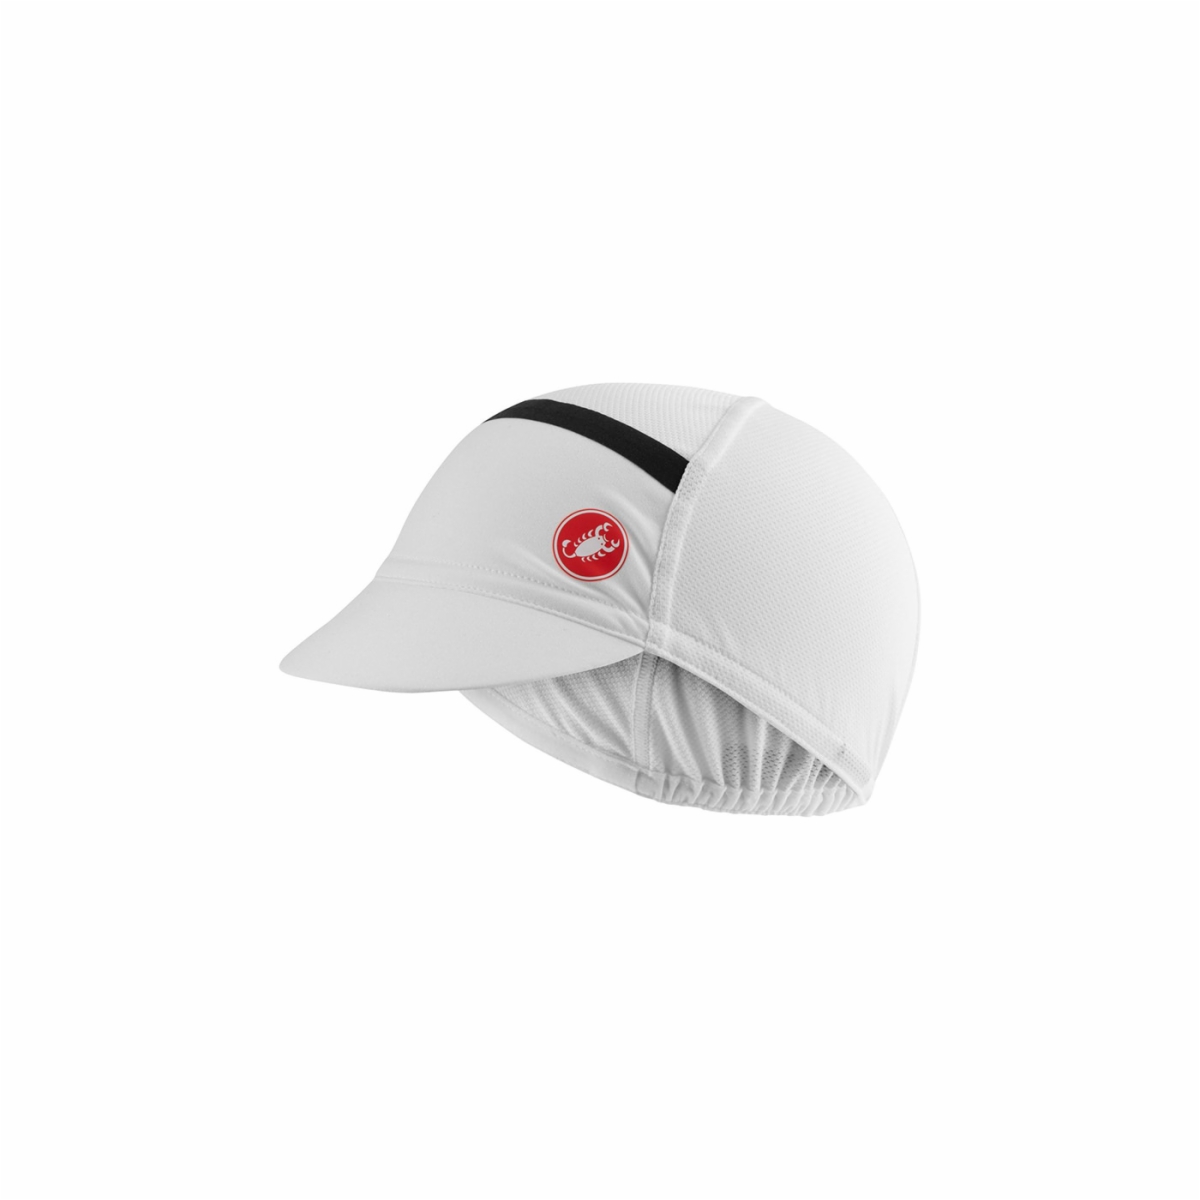 OMBRA CYCLING CAP